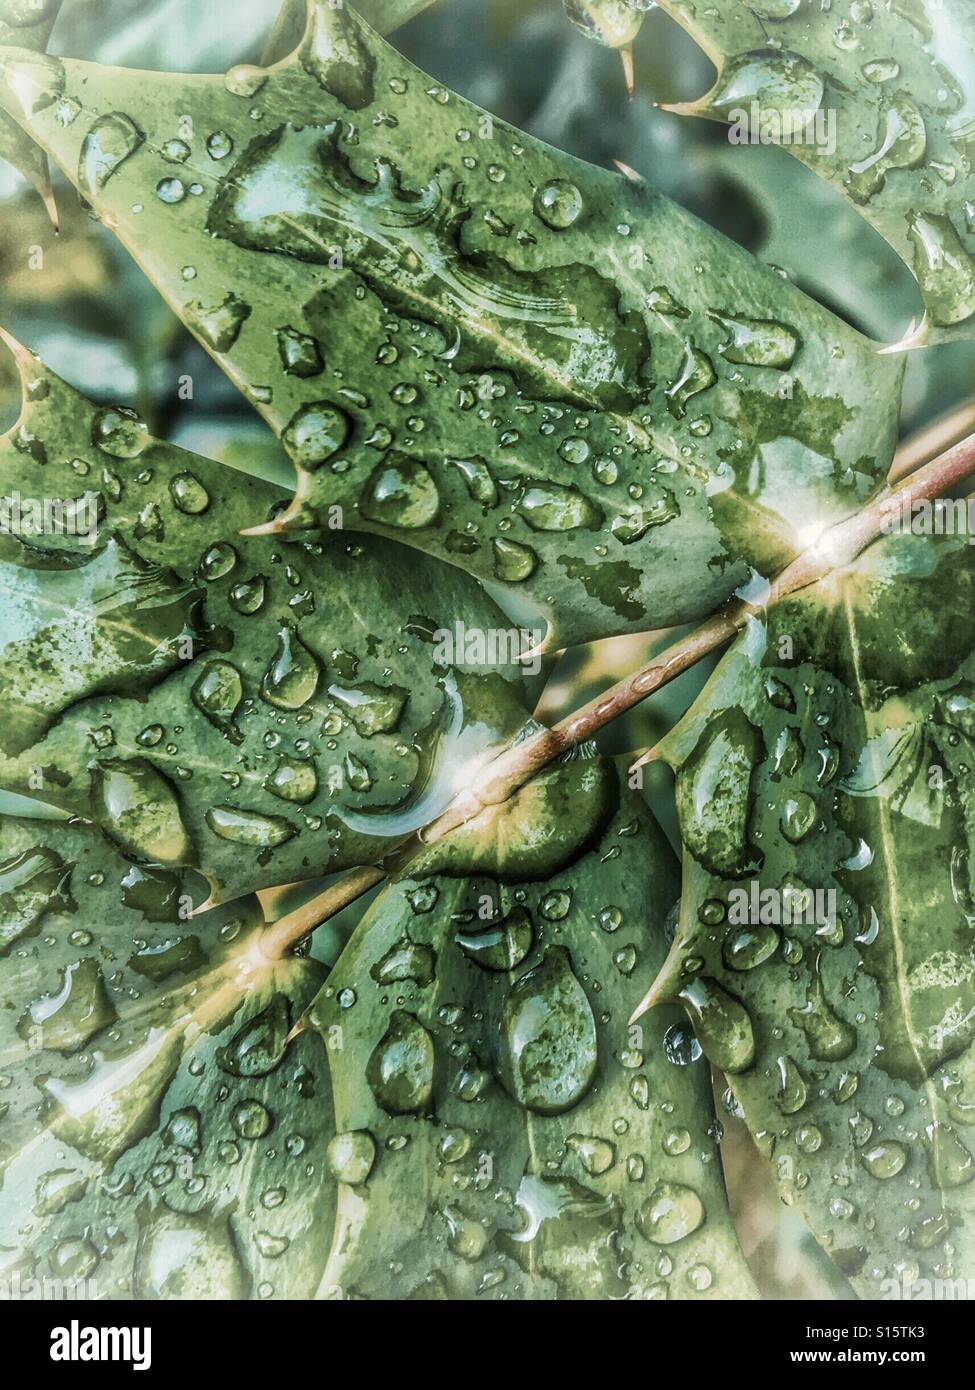 Patterns in Nature - Rain water droplets on  Mahonia leaves after a shower Stock Photo